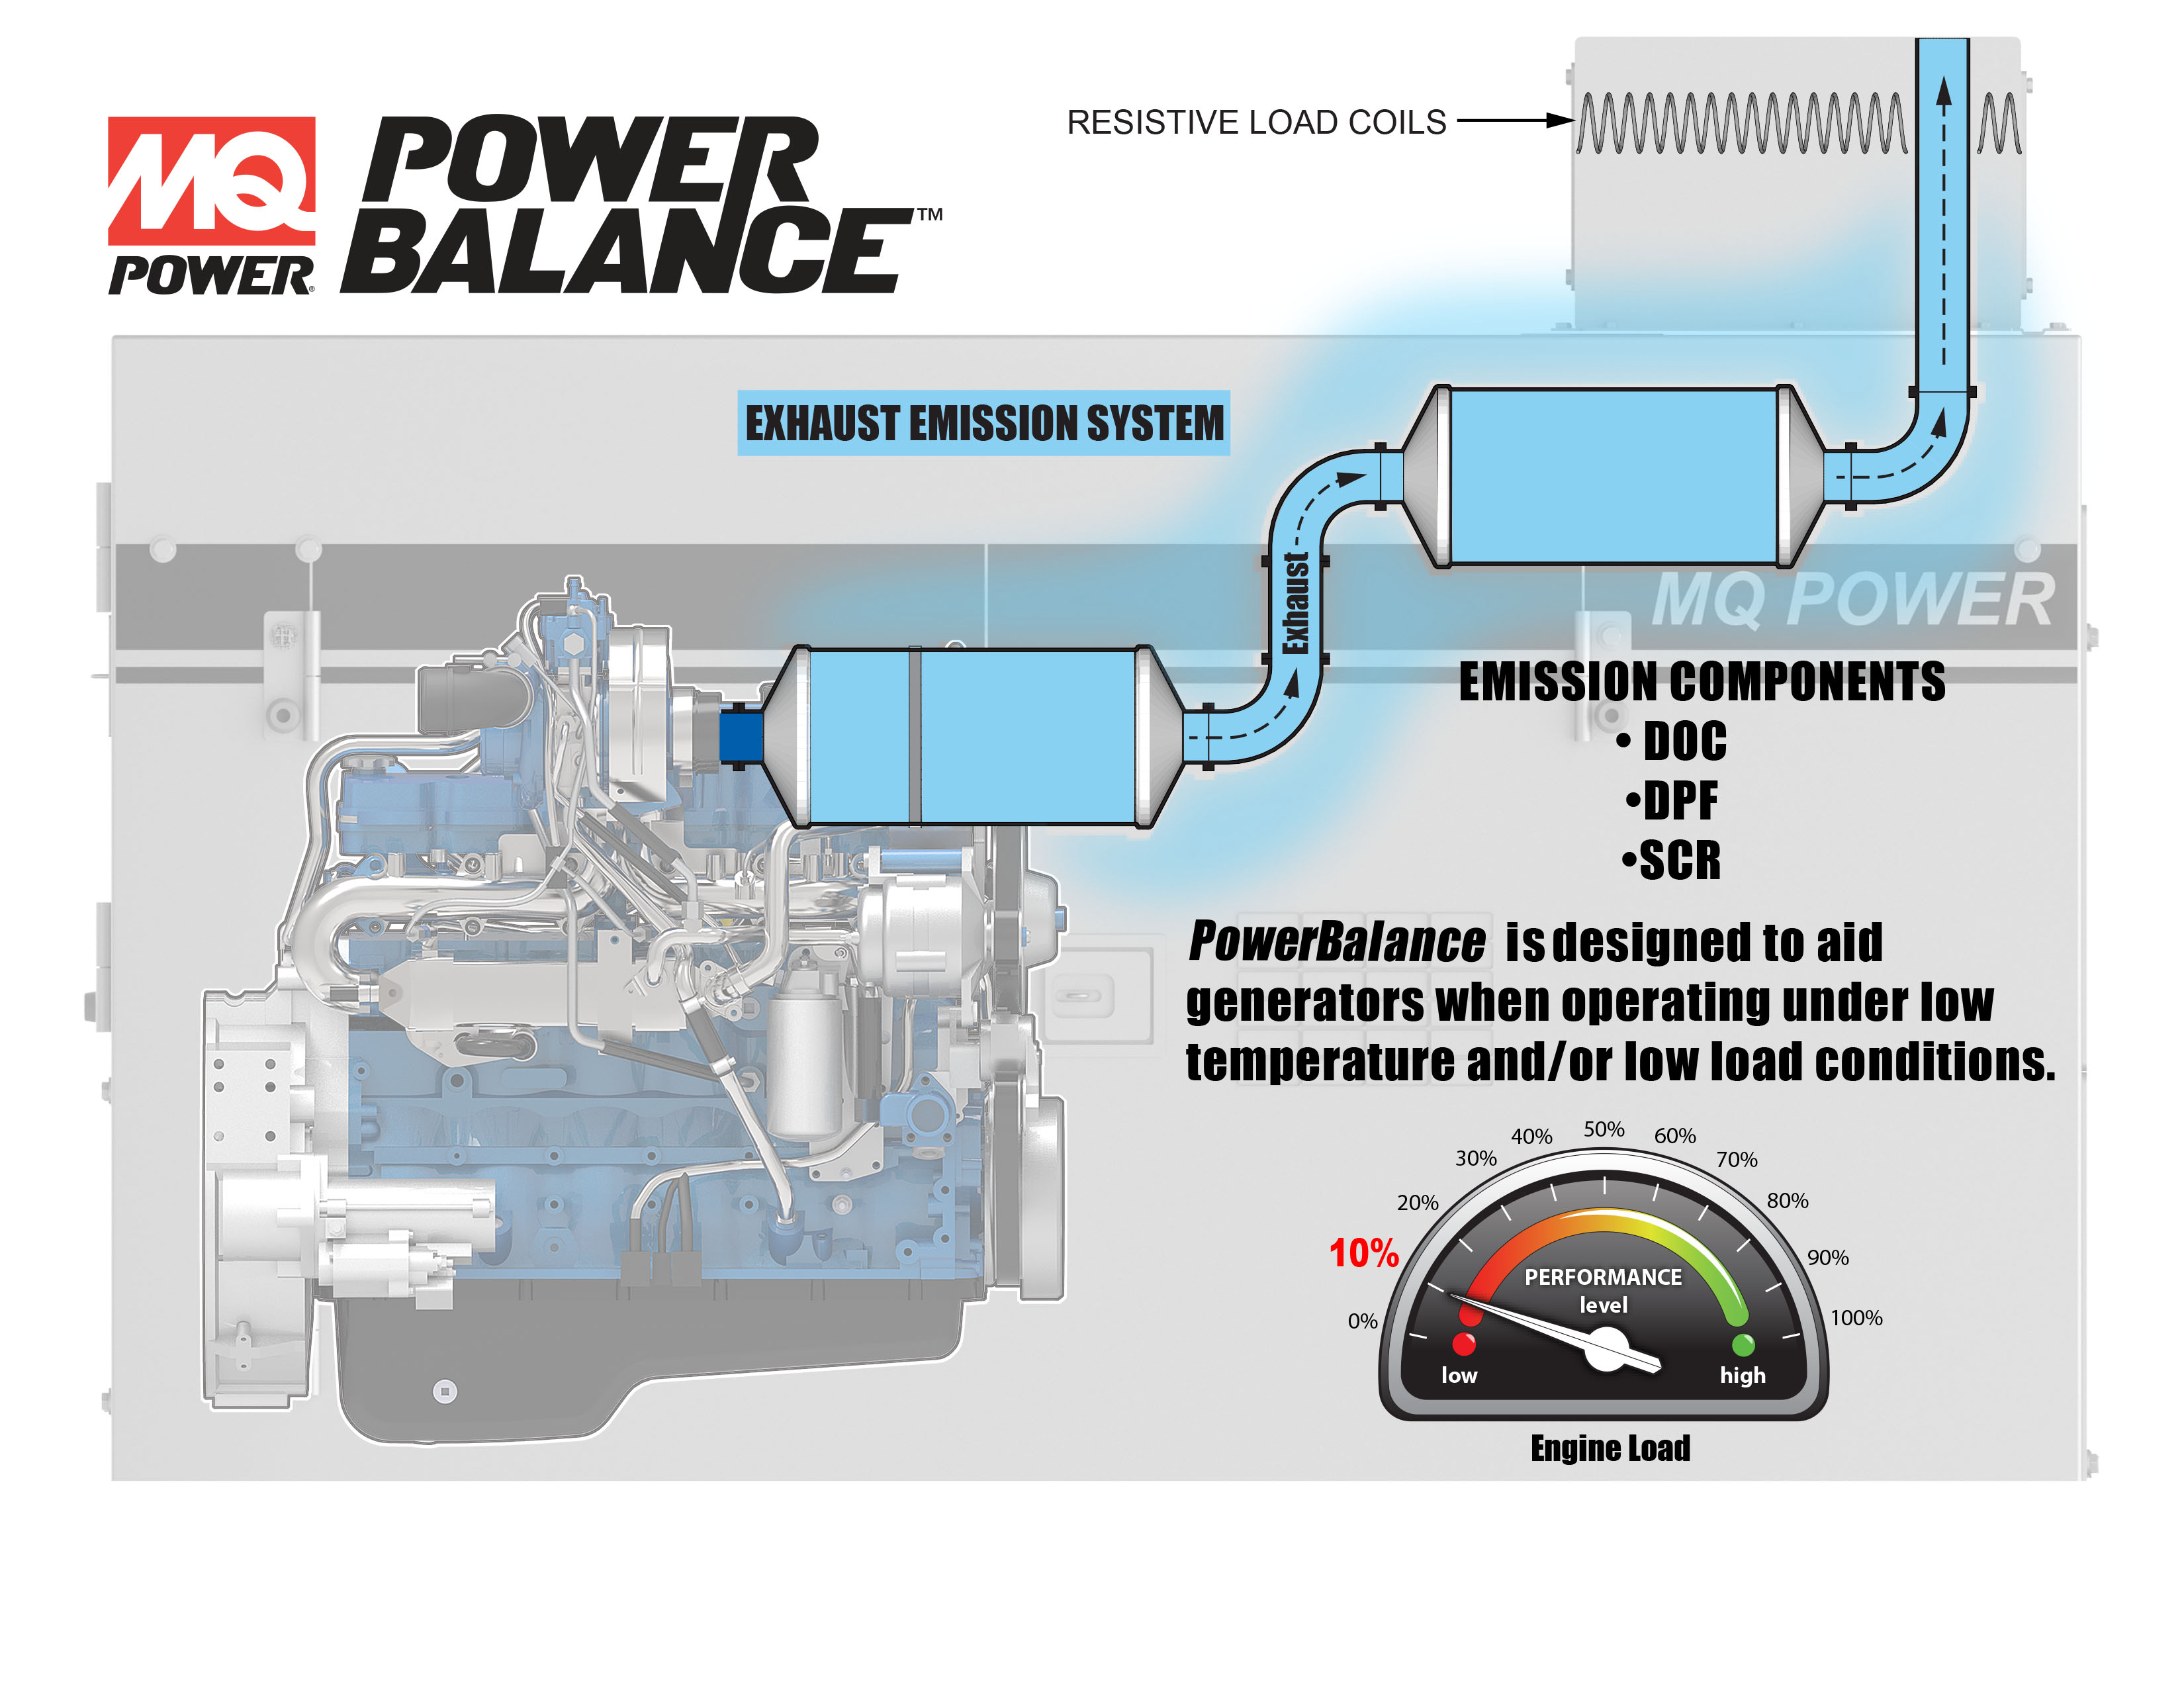 PowerBalance™ is designed to aid generators in low temp/low load conditions.